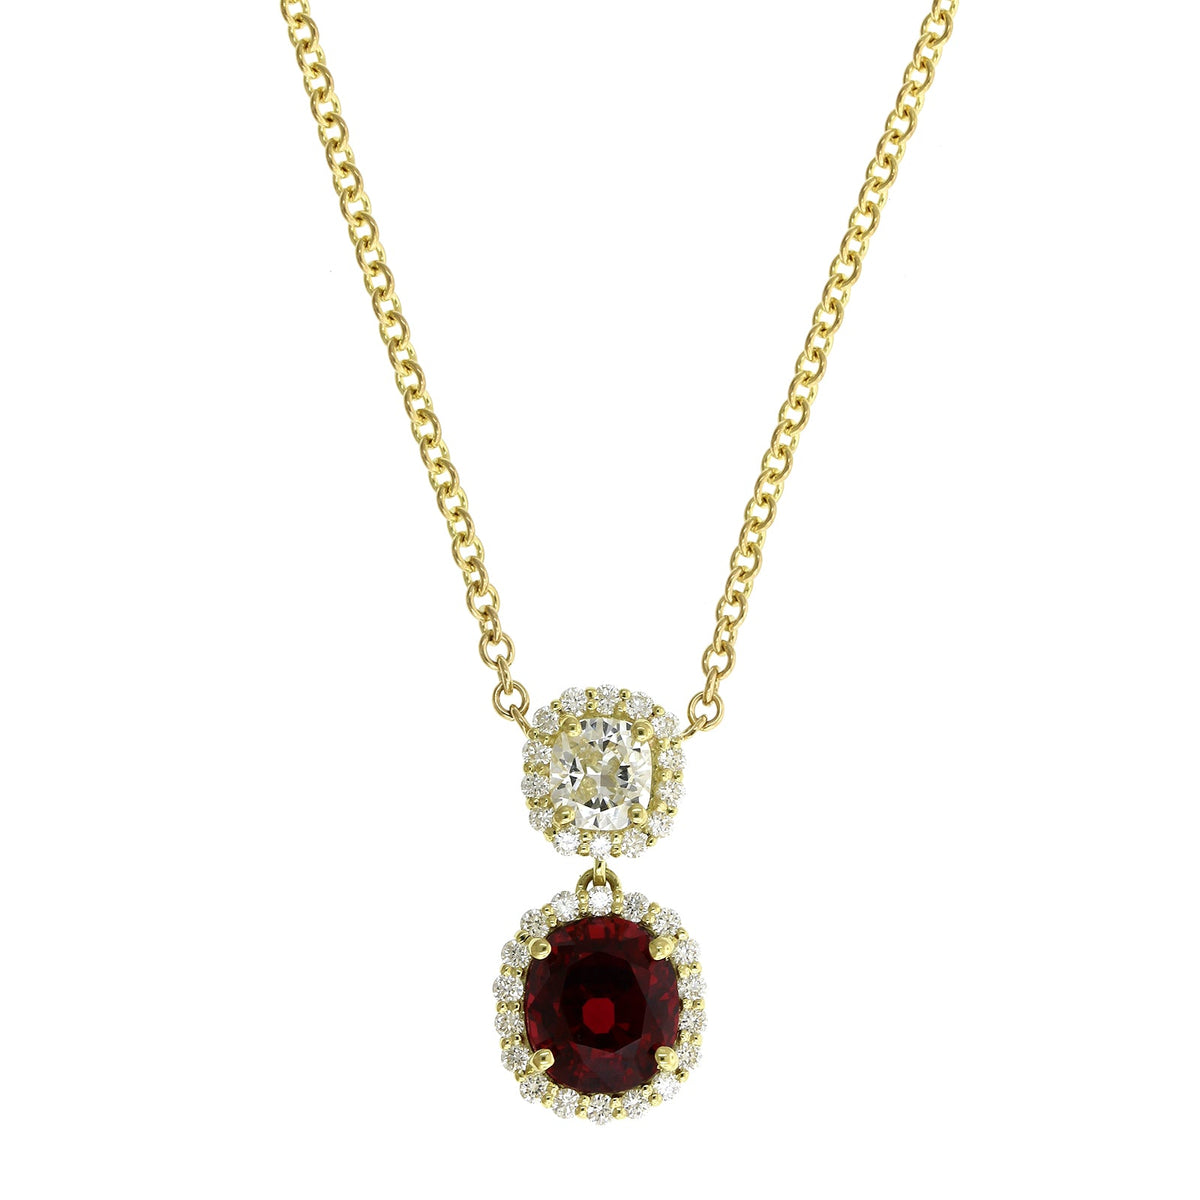 18K Yellow Gold Spinel and Diamond Necklace, 18k yellow gold, Long's Jewelers